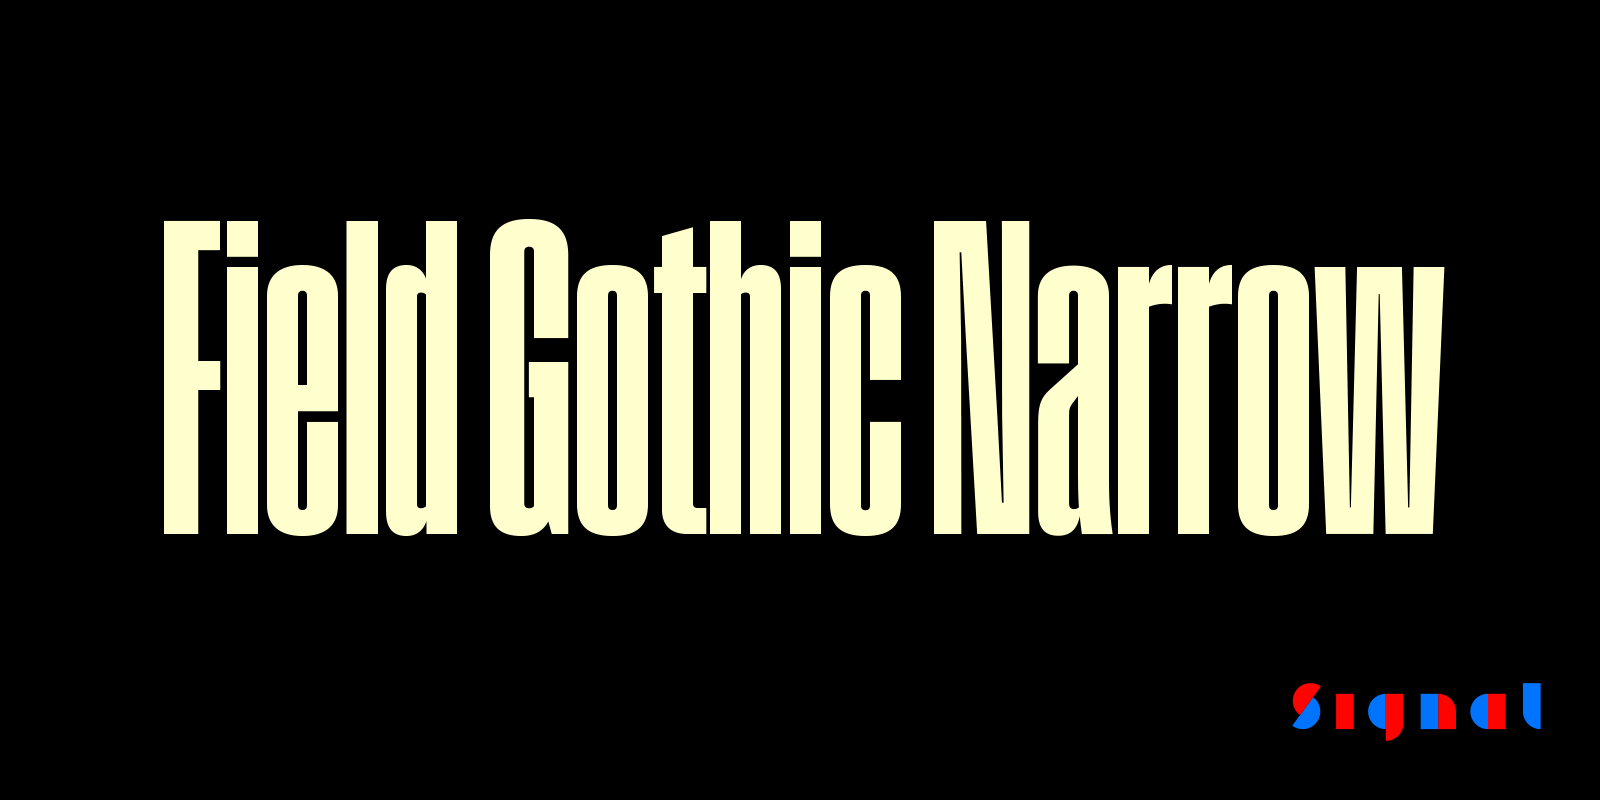 Card displaying Field Gothic Narrow typeface in various styles